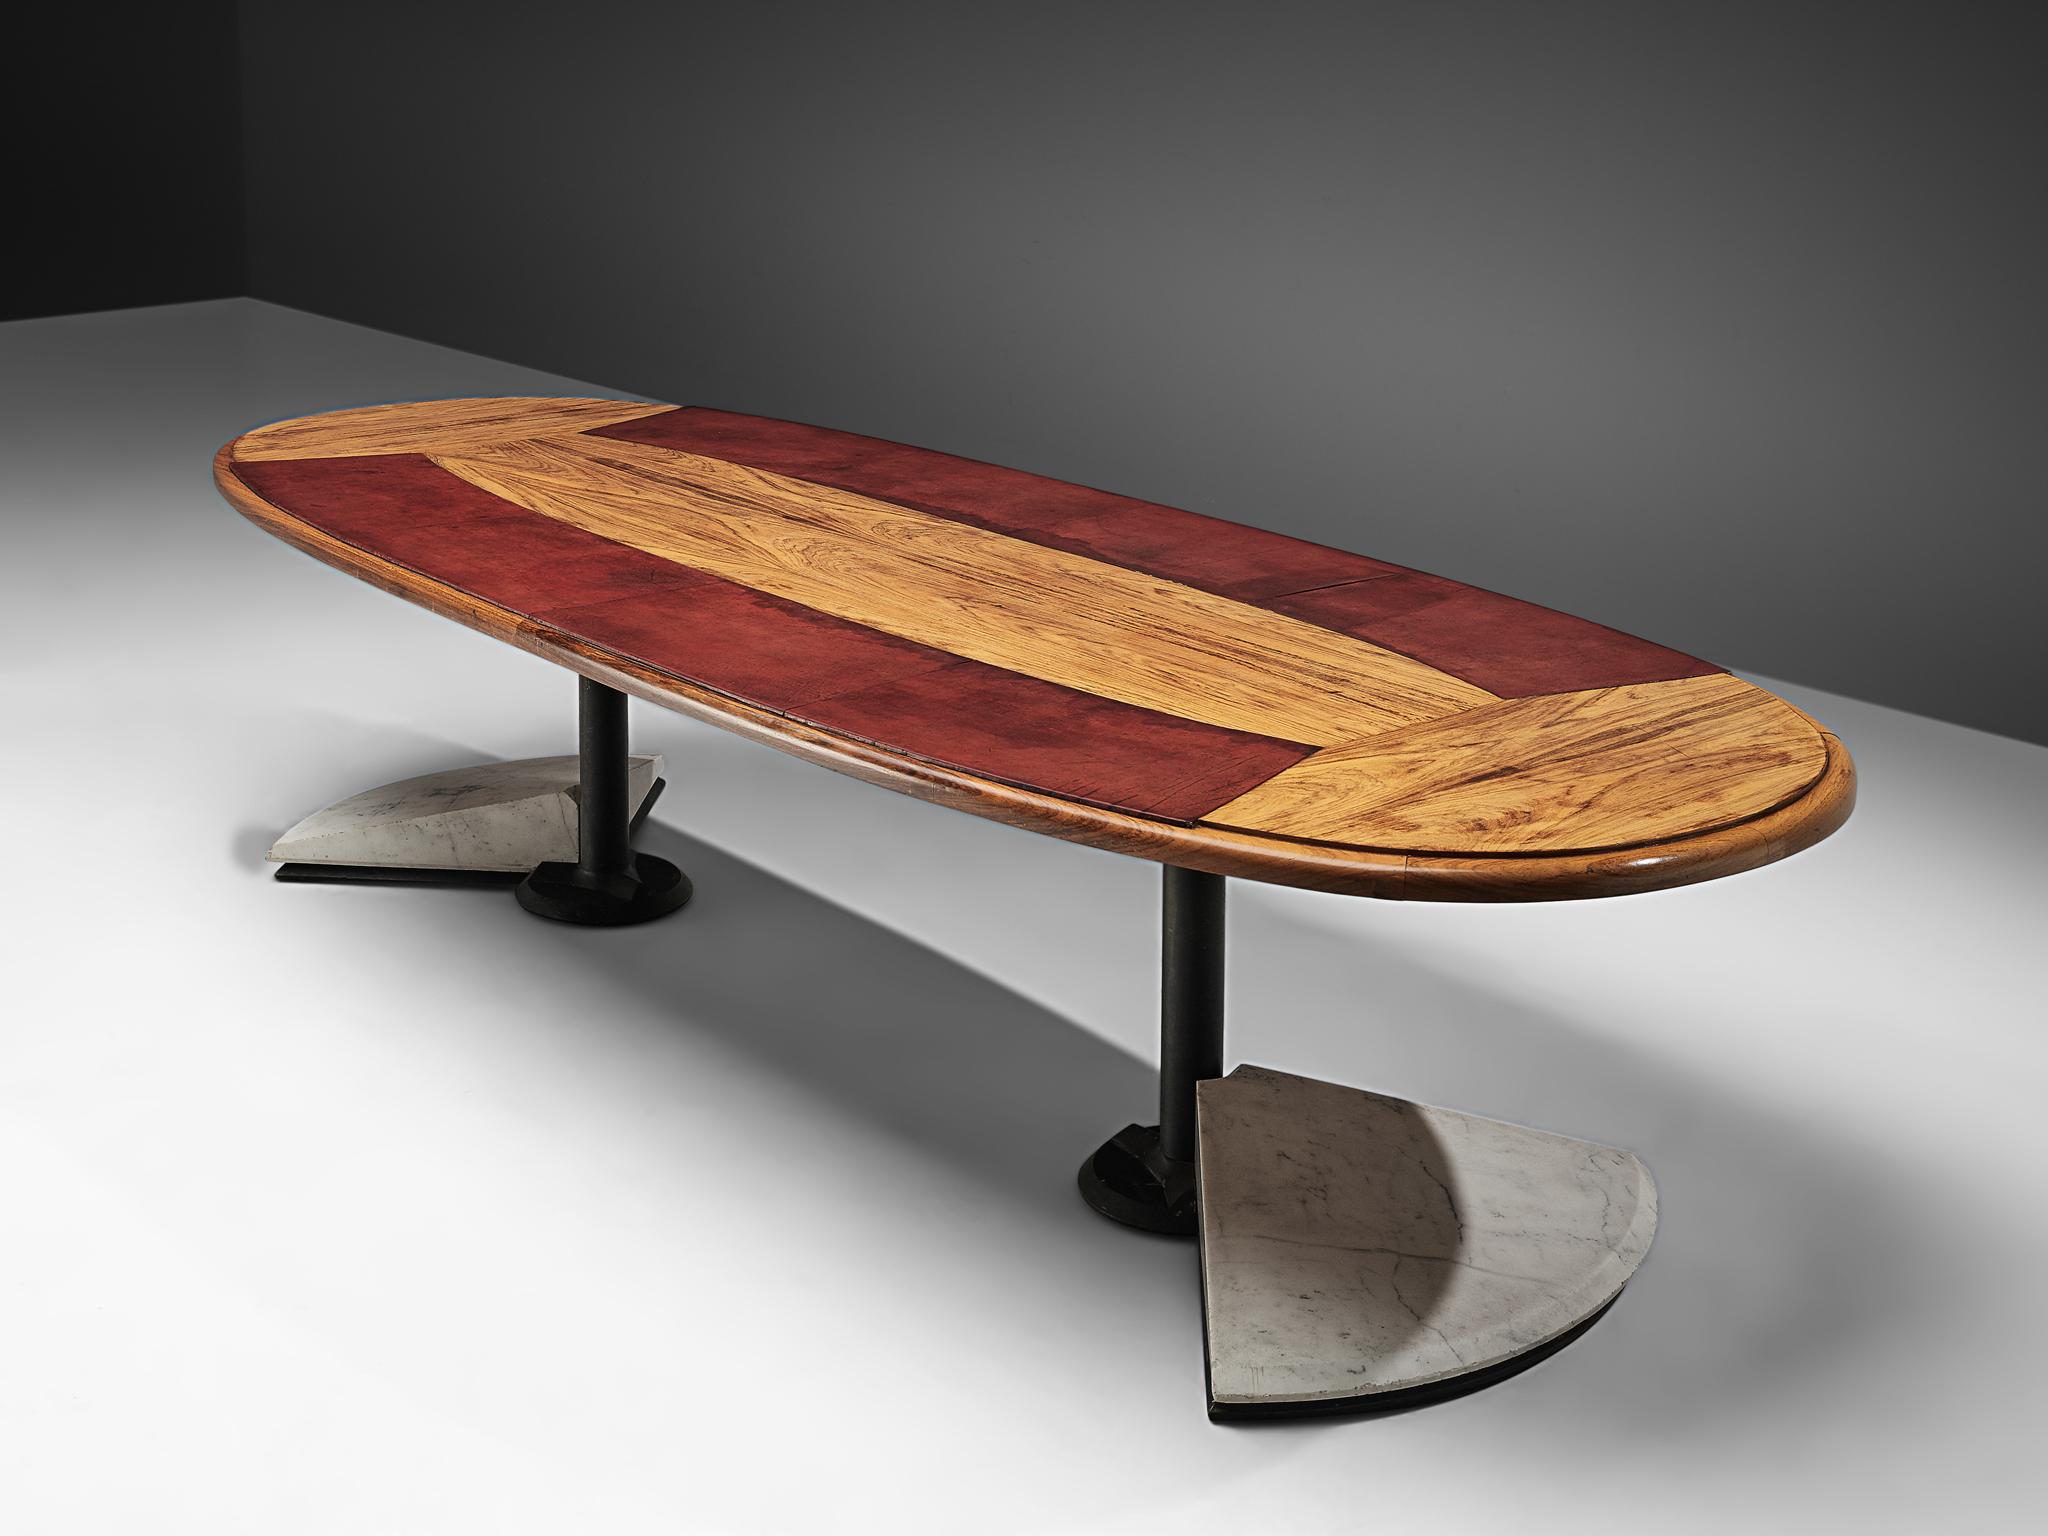 Italian Conference Table in Walnut, Marble and Red Leather